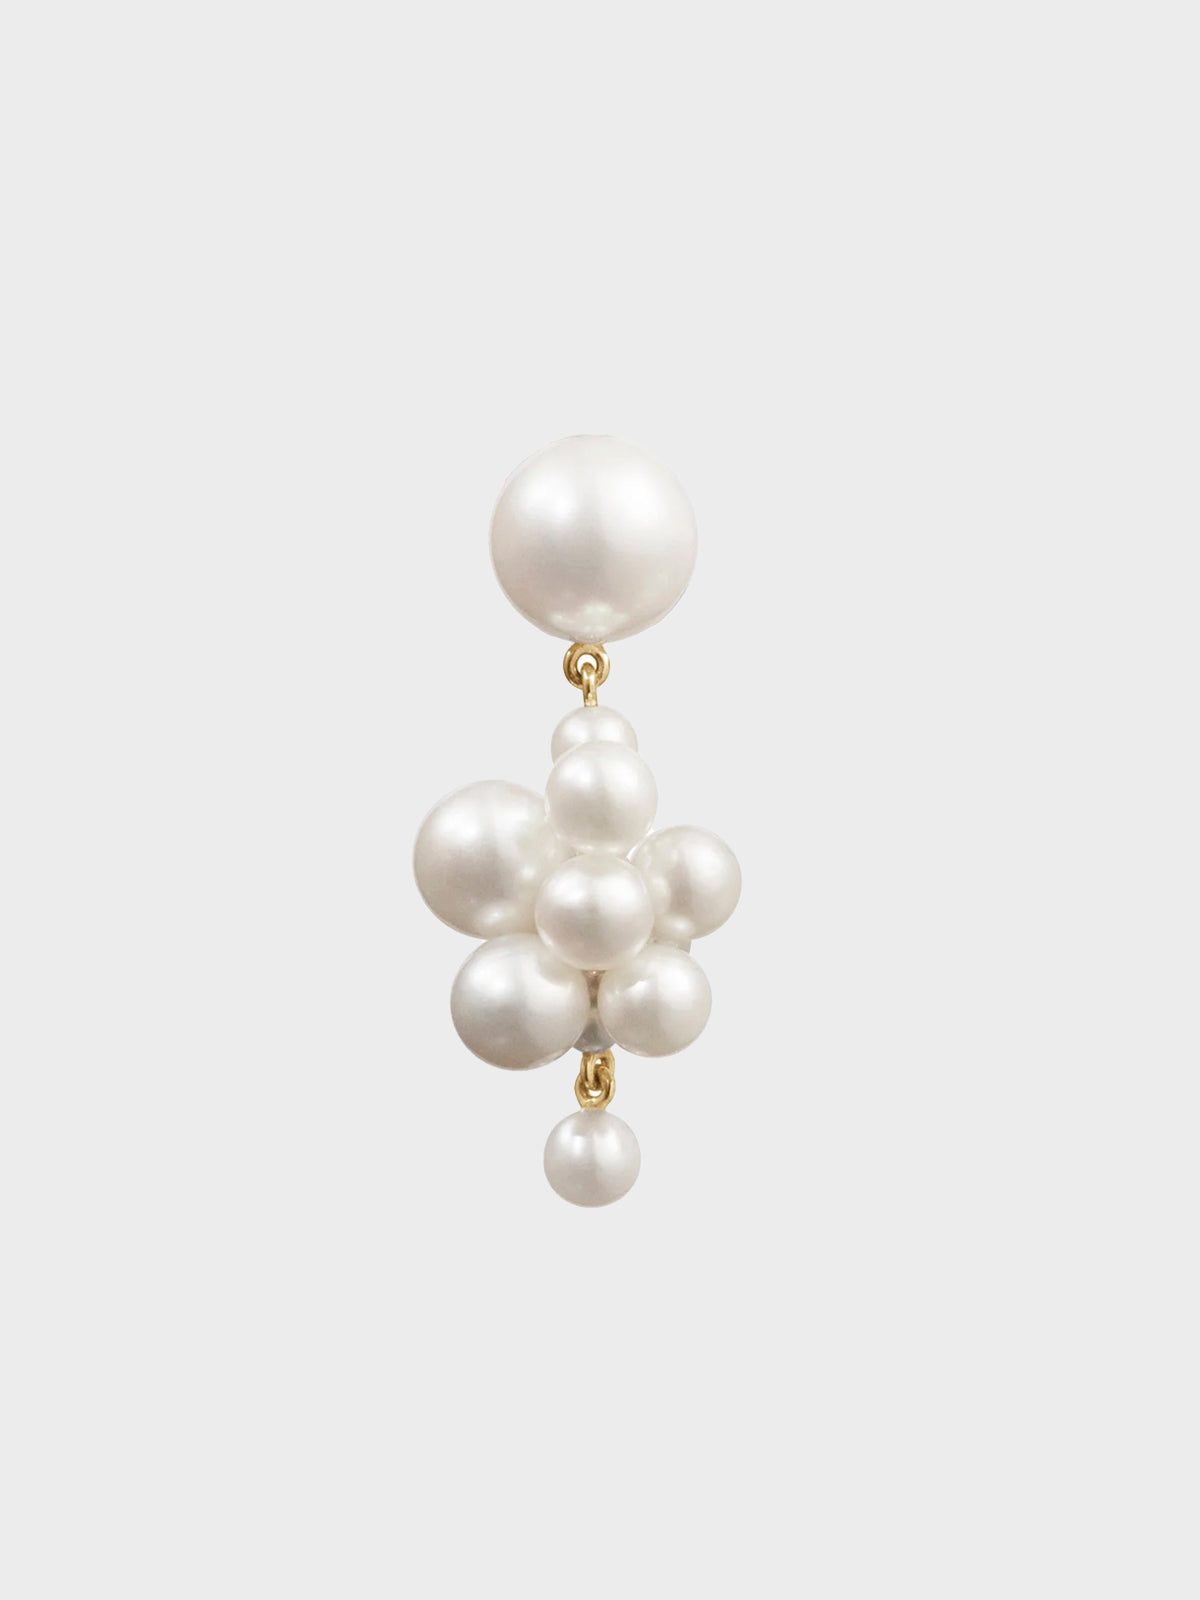 Sophie Bille Brahe | Explore the selection of SBB jewelry at stoy